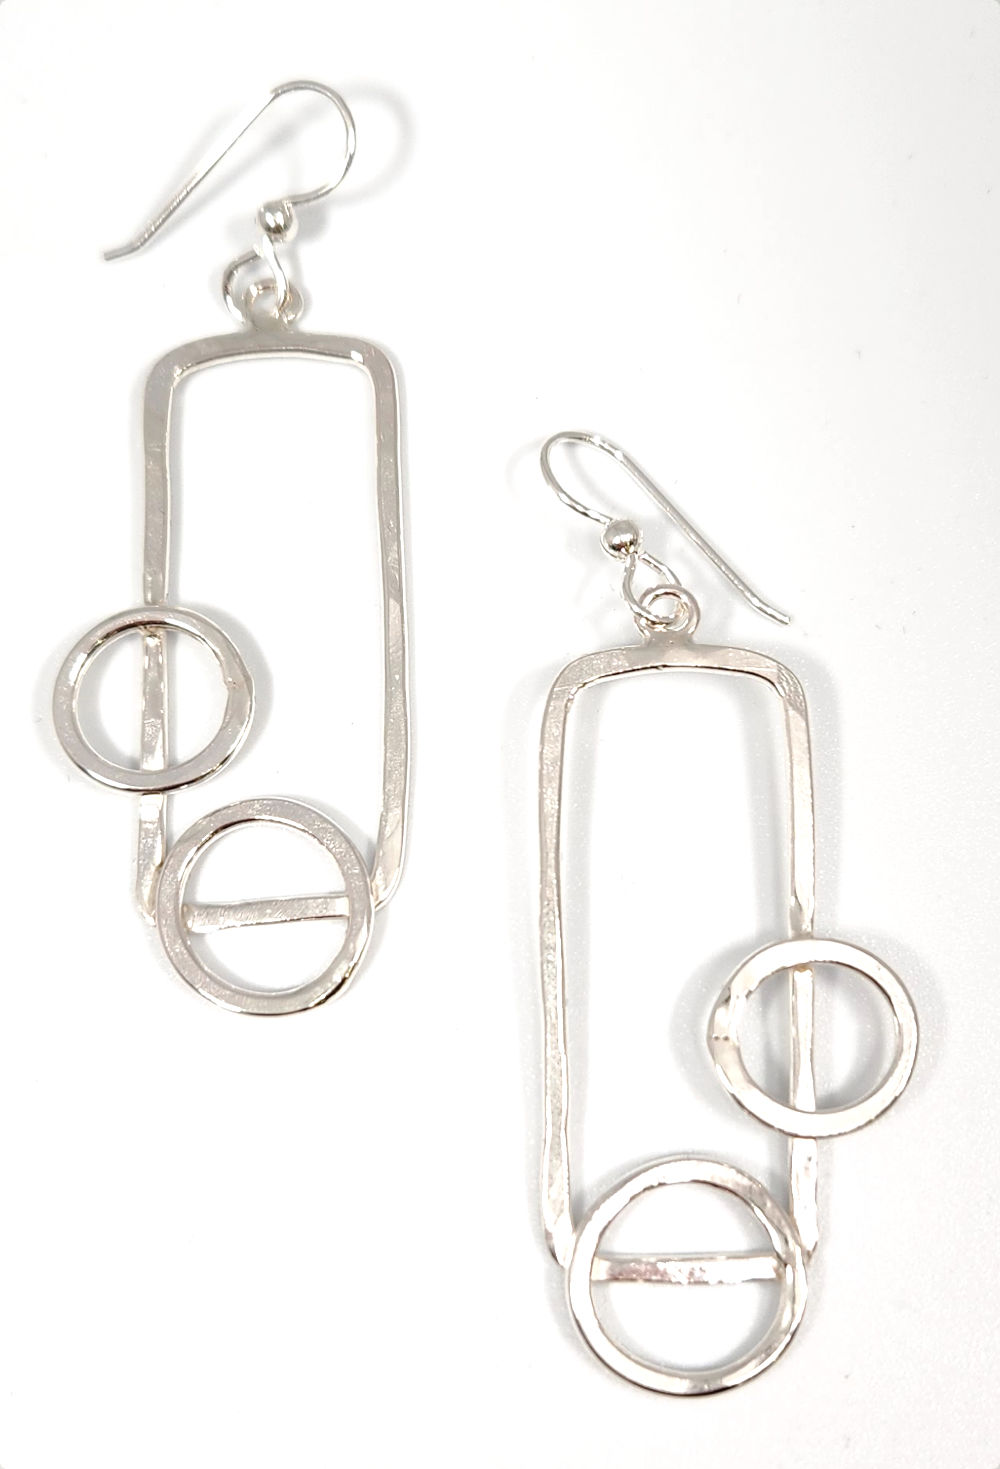 Geometric Statement earrings in sterling silver by Shirley Price